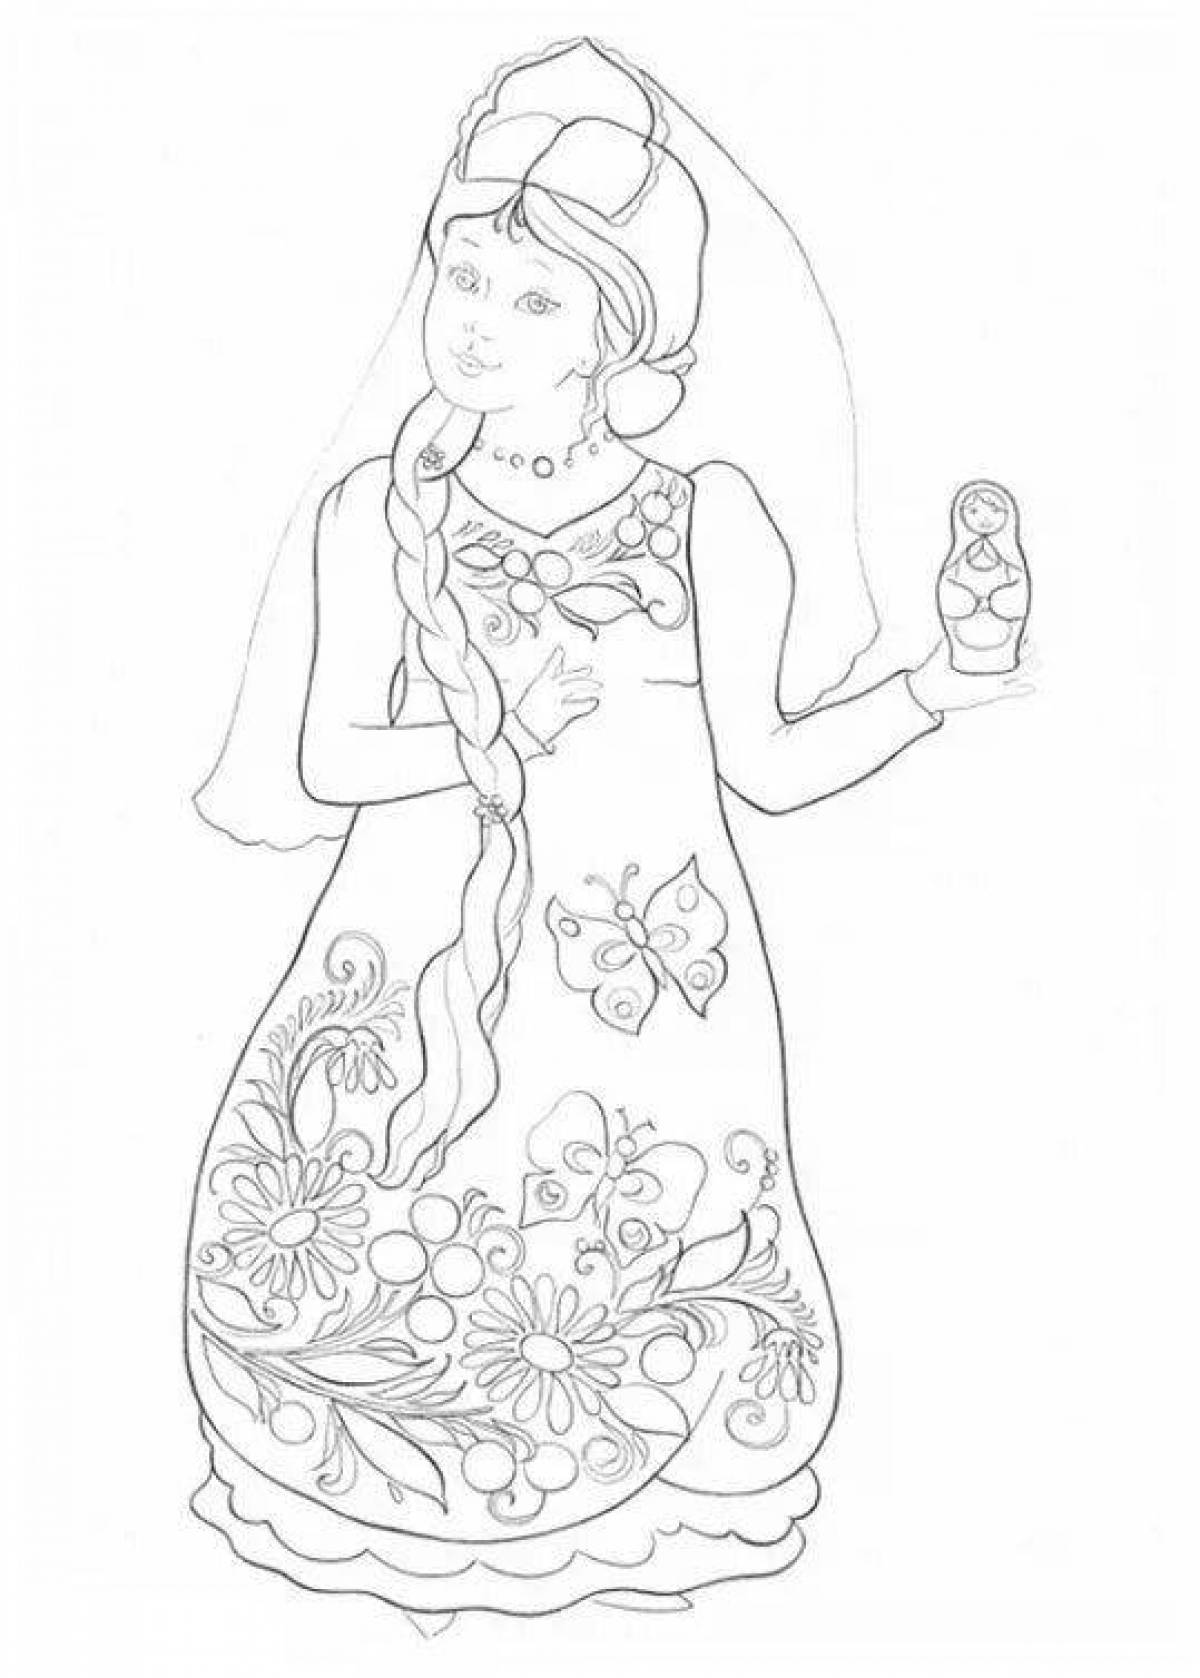 Gorgeous coloring book of a girl in a Russian folk costume